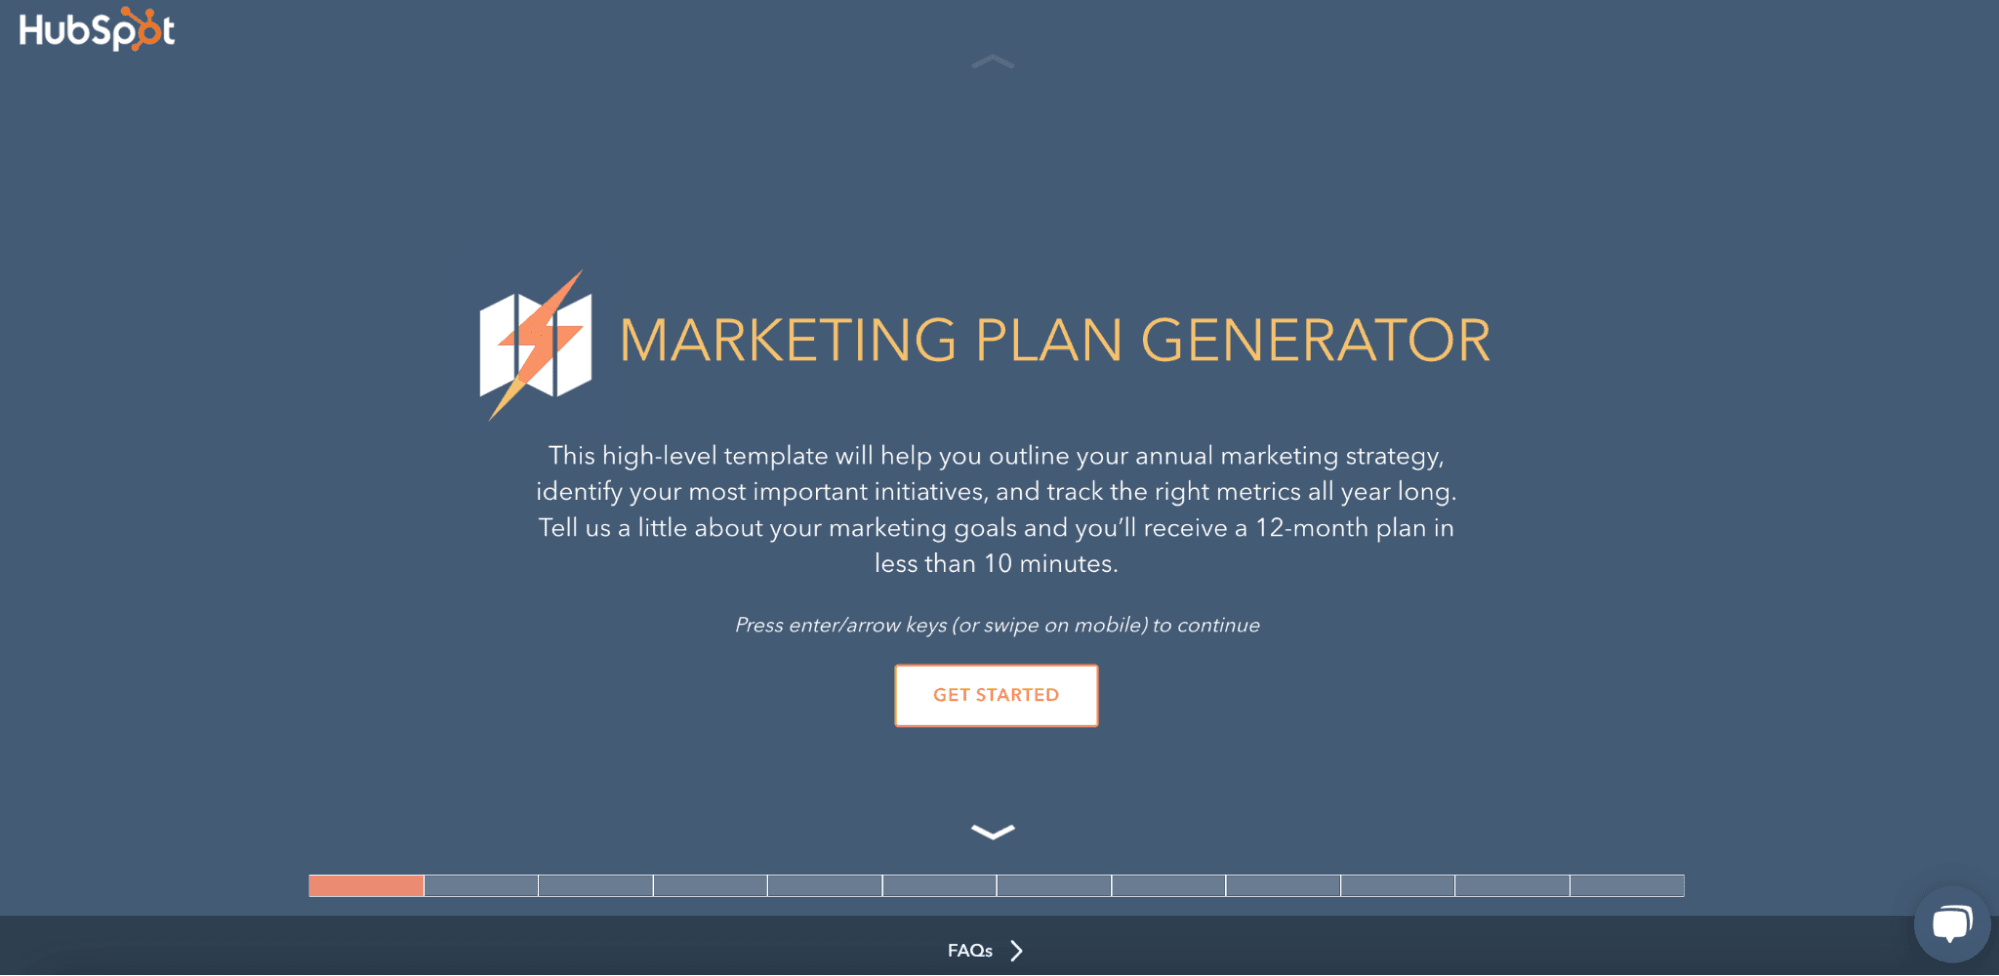 Landing page of the marketing plan generator from HubSpot